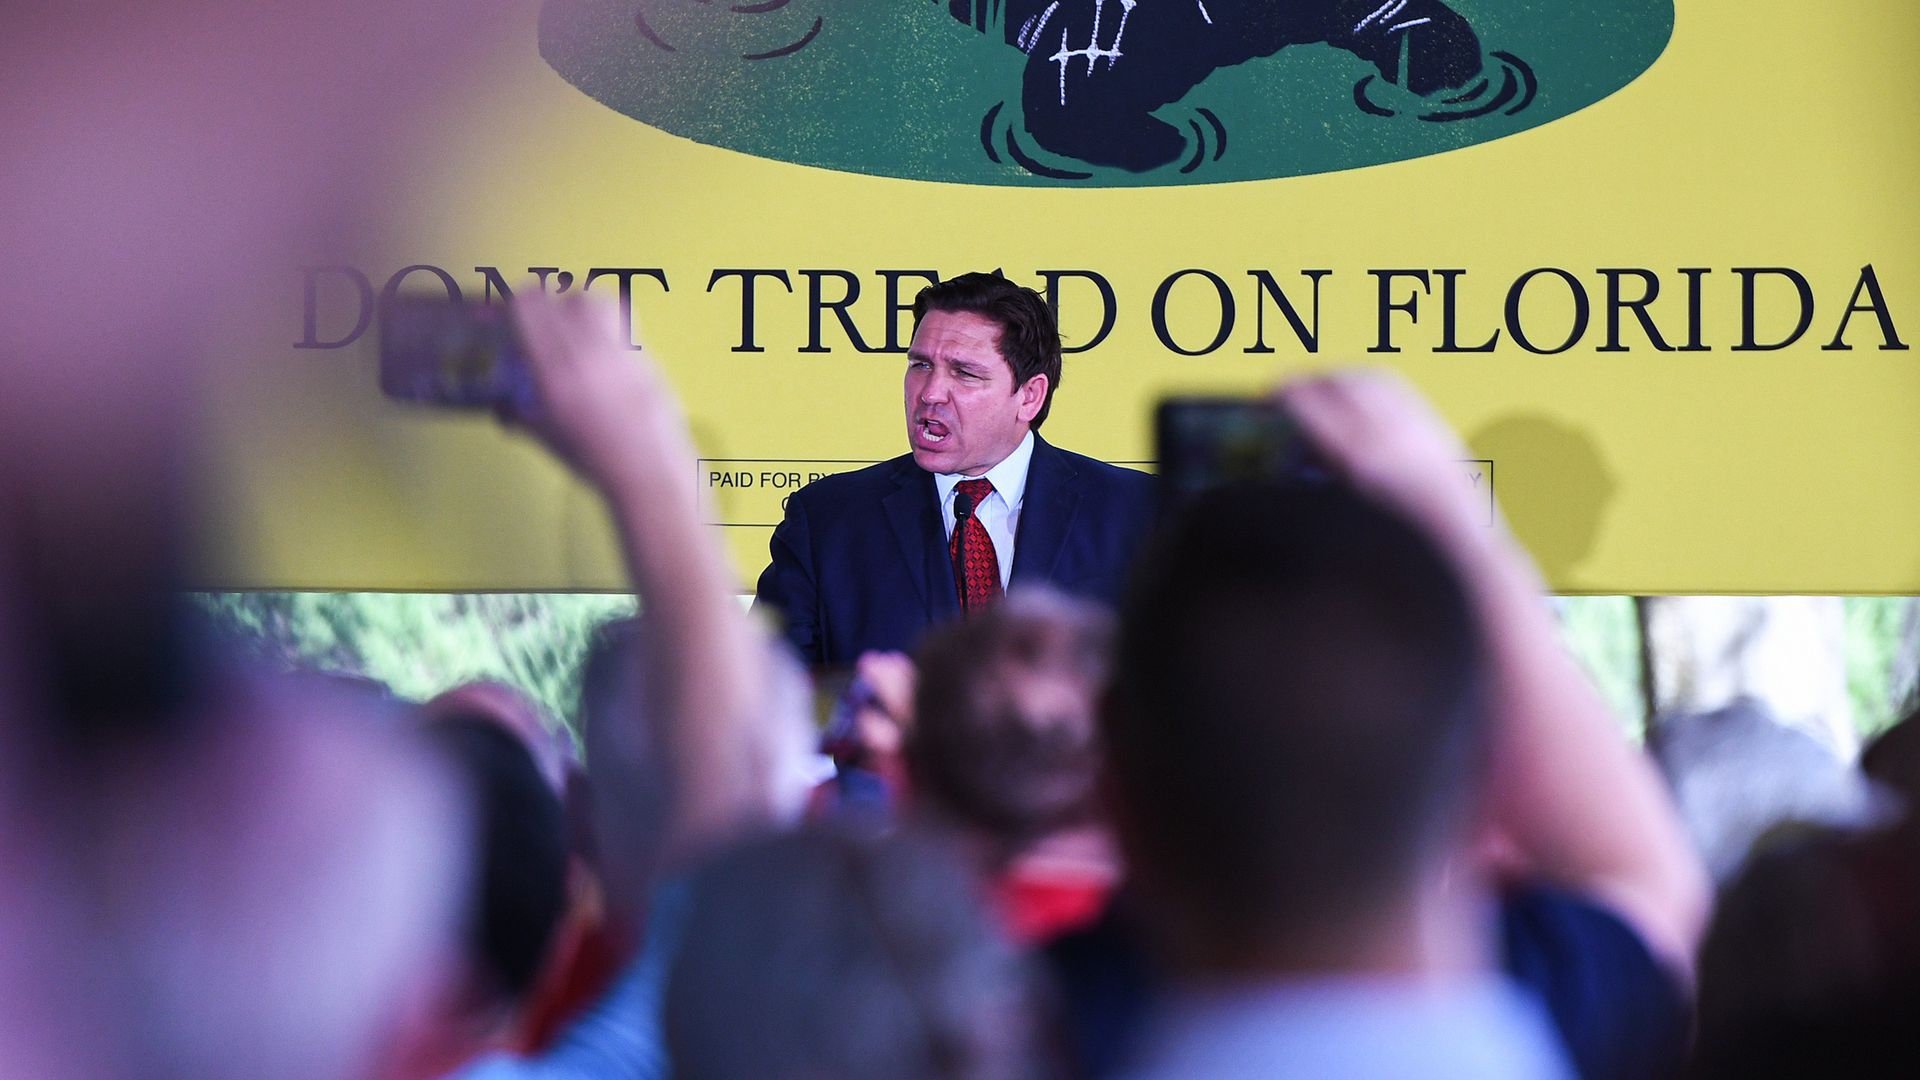 Photo of Ron DeSantis speaking from a podium at a rally against the backdrop of a banner that says "Don't Tread On Florida"